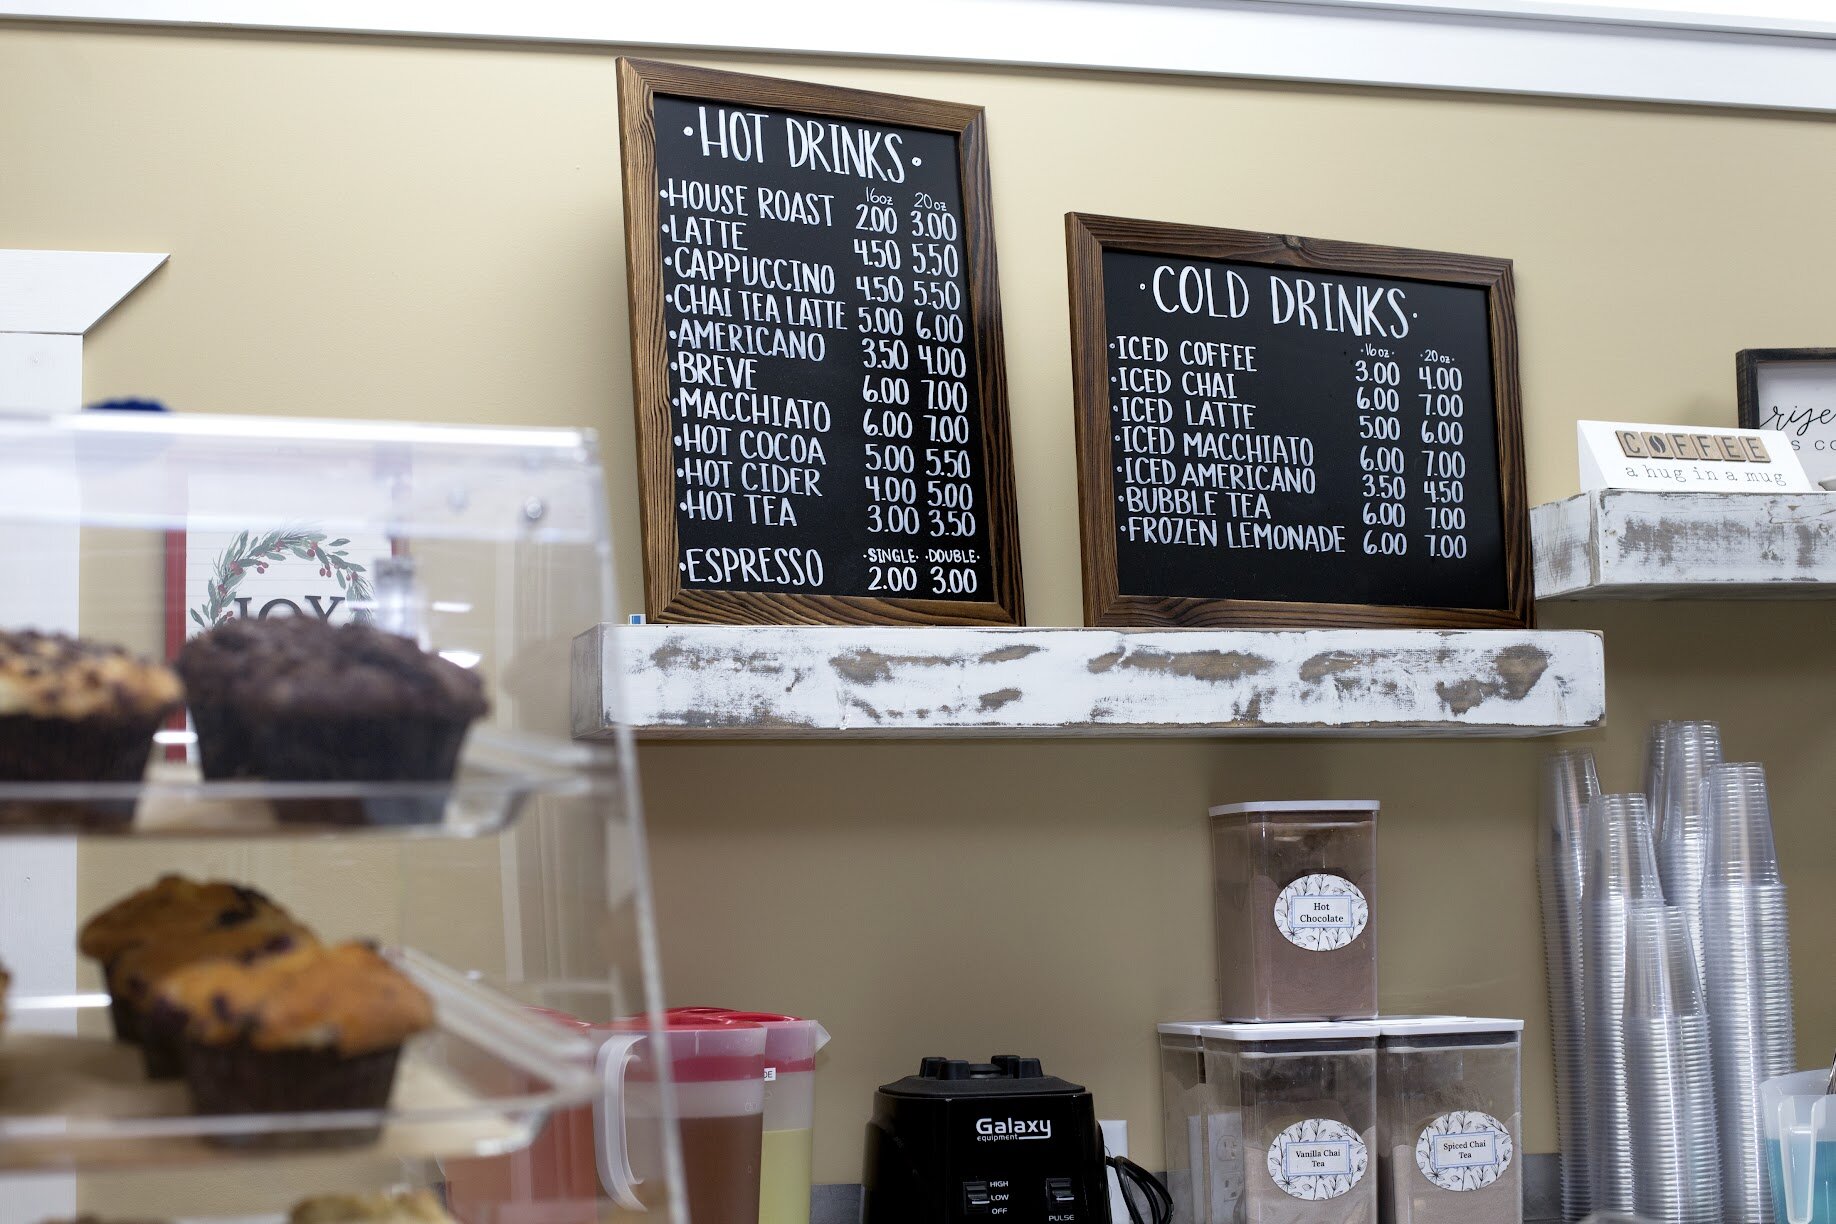 The Sweet Tooth Cafe has an expansive menu offering hot beverages such as coffee or hot chocolate to cold drinks like bubble tea and lemonade.